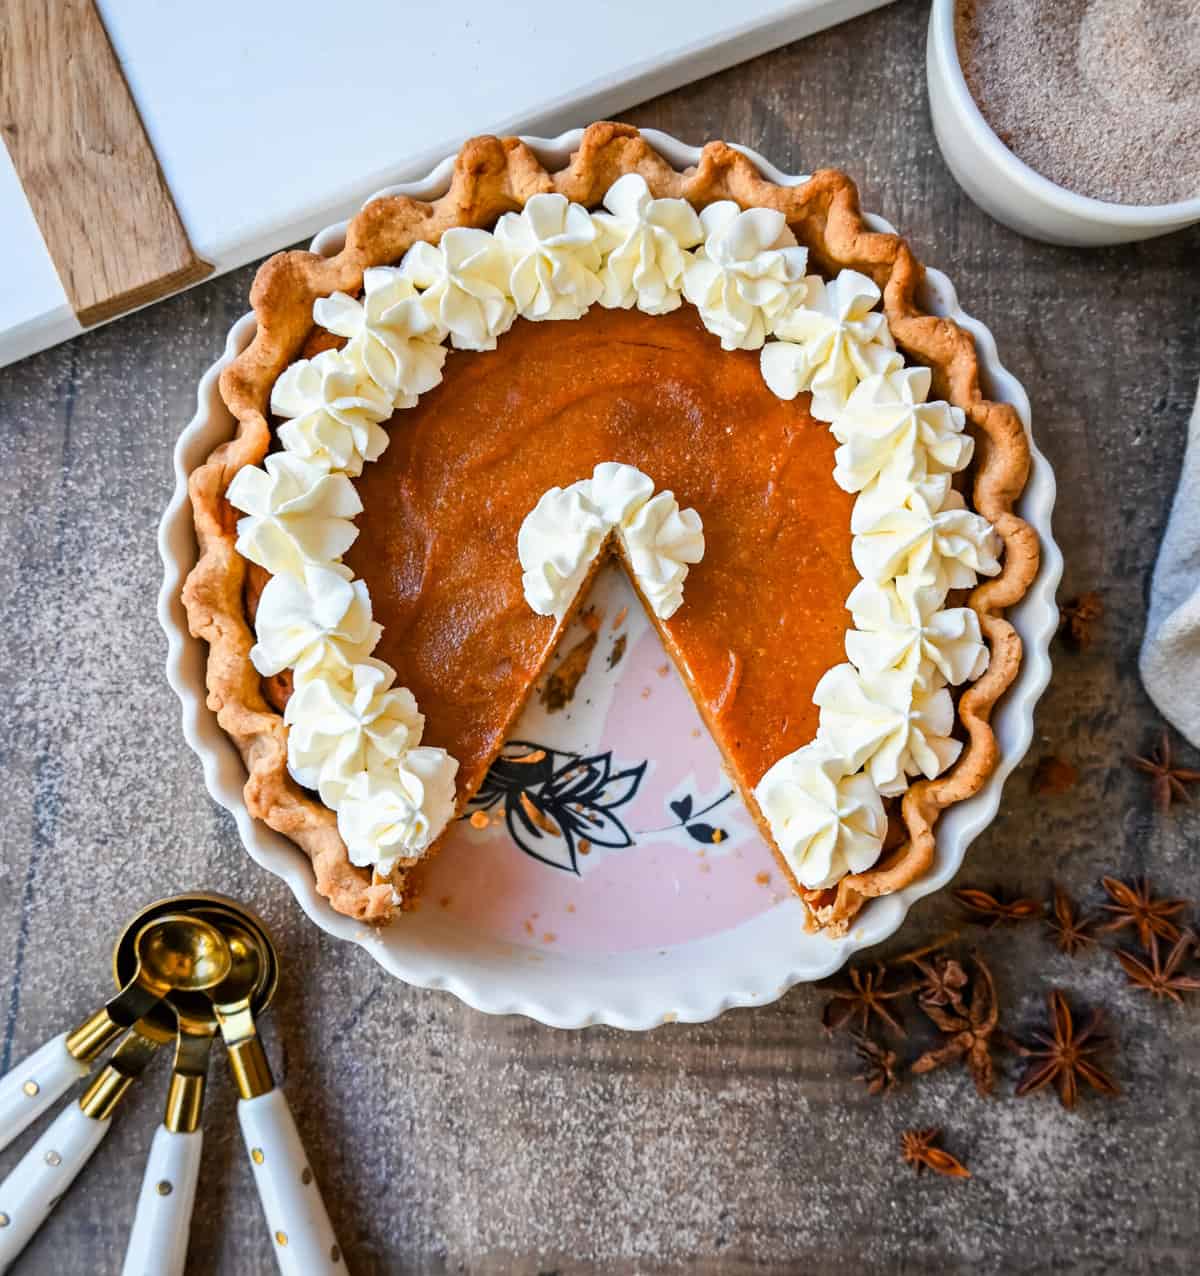 This Southern Sweet Potato Pie has the creamiest, spiced brown sugar sweet potato filling in a buttery crust and topped with fresh whipped cream. This is the perfect Fall and Thanksgiving dessert.